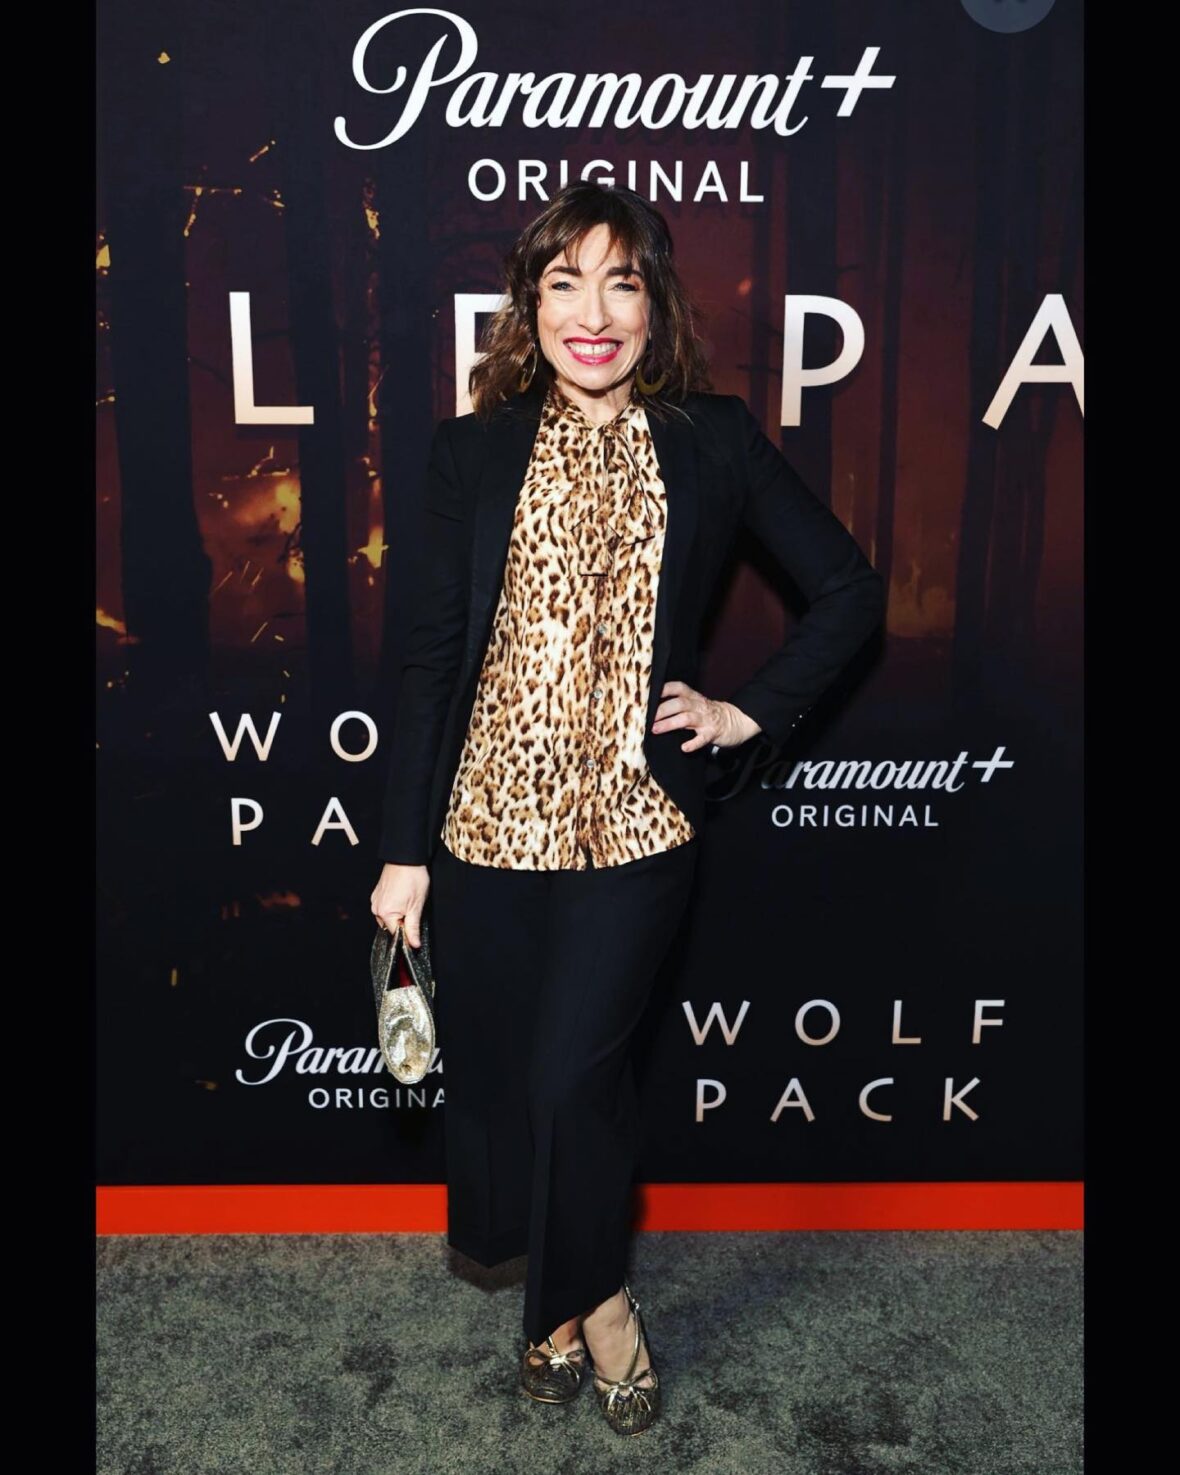 You are currently viewing I went full-leopard for @paramountplus’s @wolfpackonpplus #premiere! 🦁🐺🤷🏻‍♀️ Shout-out to @styledbyaginger, a treasured member of my #wolfpack, responsible for this savage look! #rawr #photoby @iamtoddphoto #paramountplus #wolfpackseries #hollywood #redcarpet #animalprint